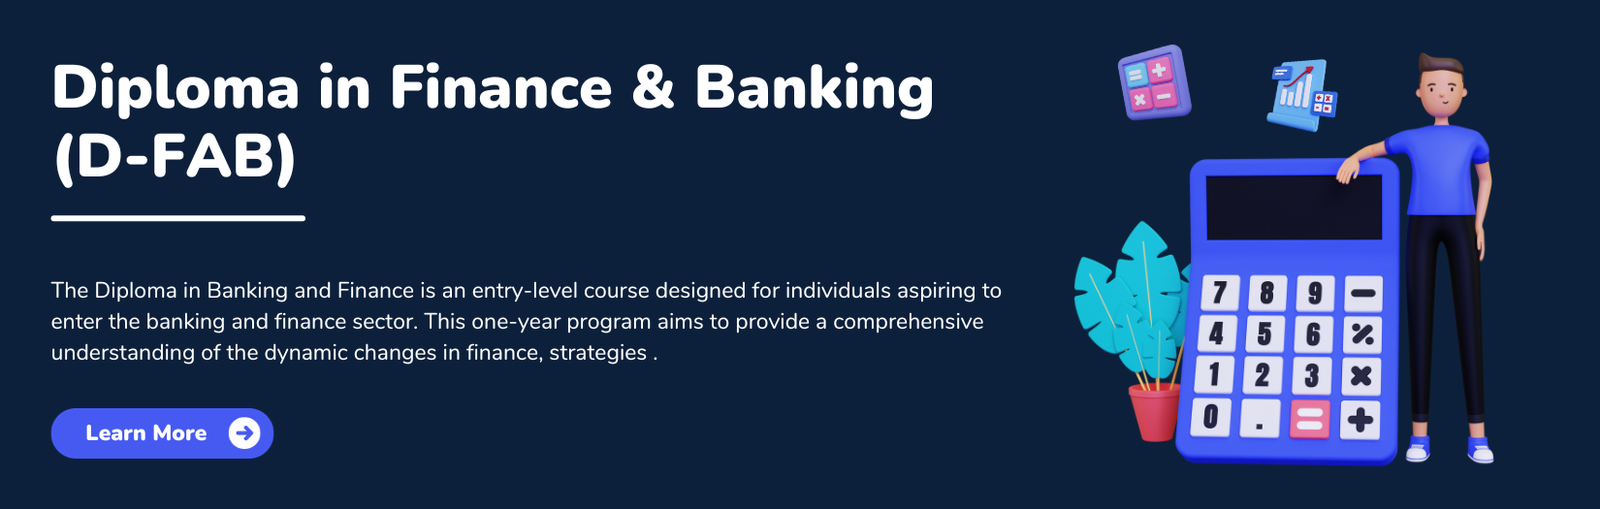 Diploma in Finance & Banking (D-FAB)